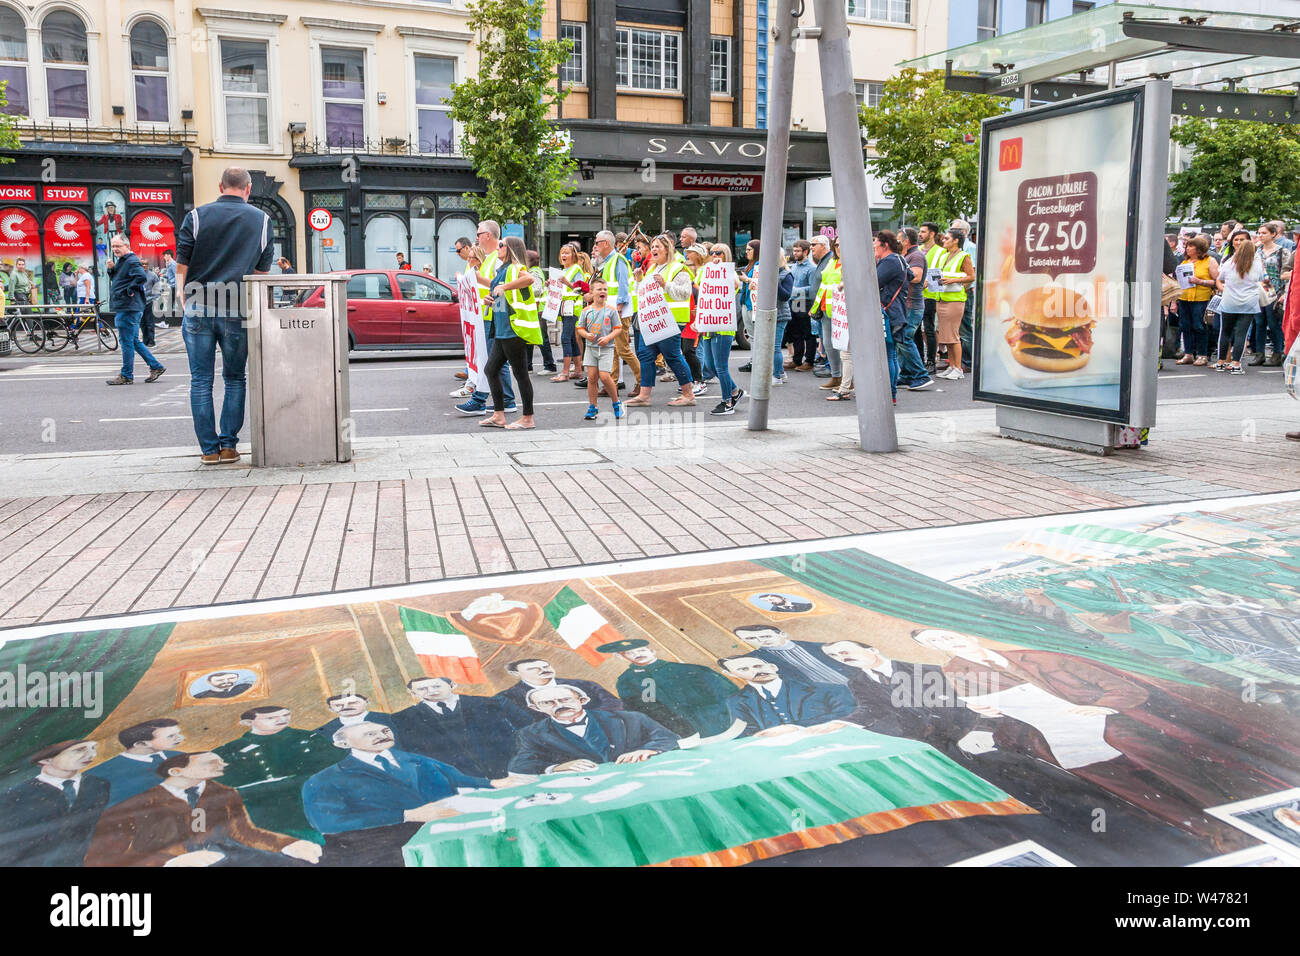 Cork City, Cork, Ireland. 20th July, 2019. Postal workers marchon Patrick Street in protest against the proposed closure by An Post of its distribution centre in Little Island with the loss of 250 jobs, on the streets of Cork, Ireland. -Credit;  David Creedon / Alamy Live News Stock Photo